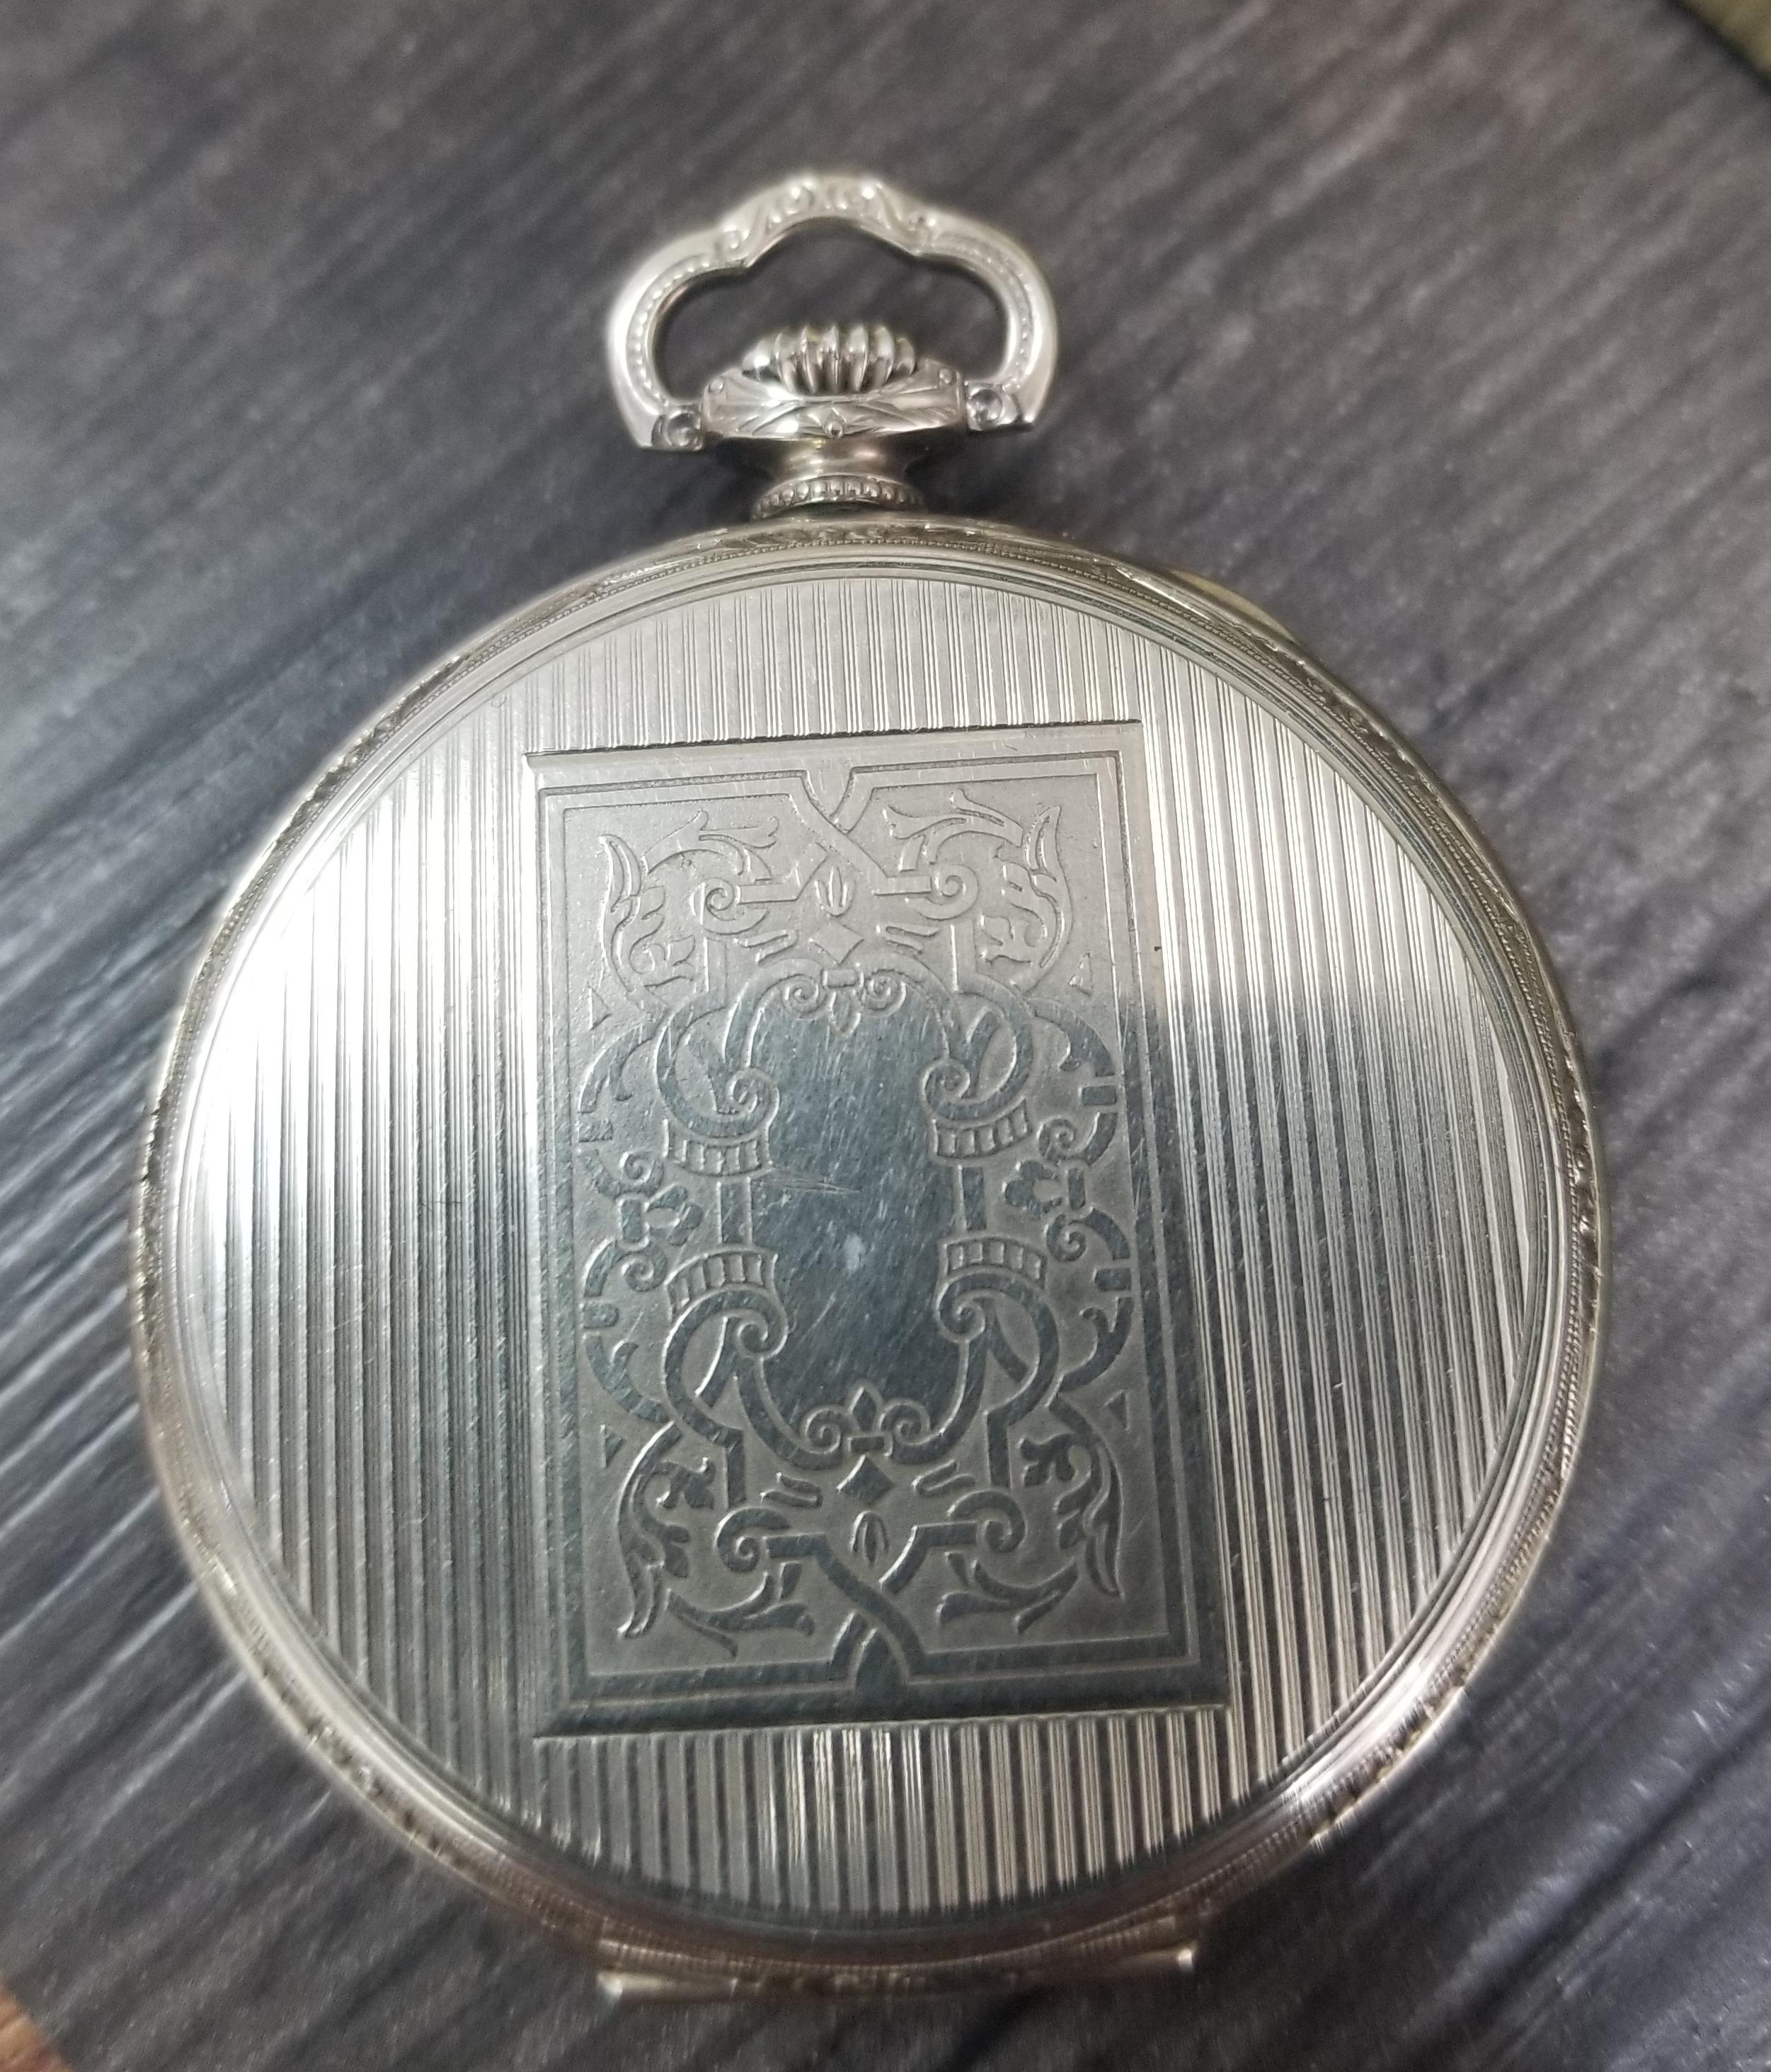 E. Howard 17 Jewels 3 Positions White Gold Filled Pocket Watch, circa 1917 1